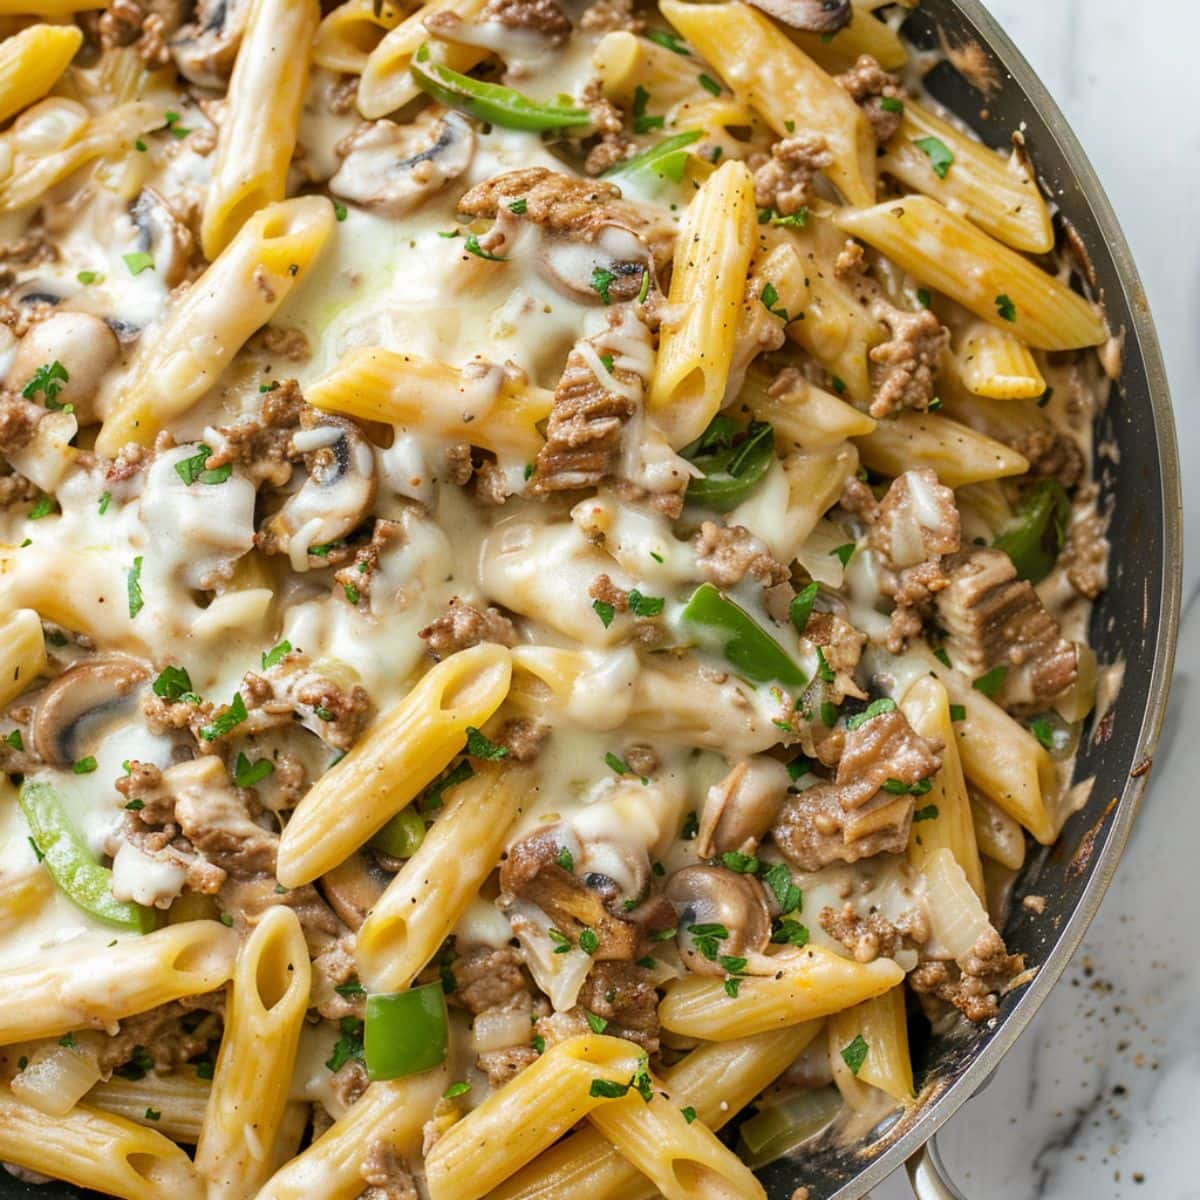 Philly Cheesesteak pasta in a cast iron skillet with sliced red bell pepper, beef and penne pasta in a creamy sauce.